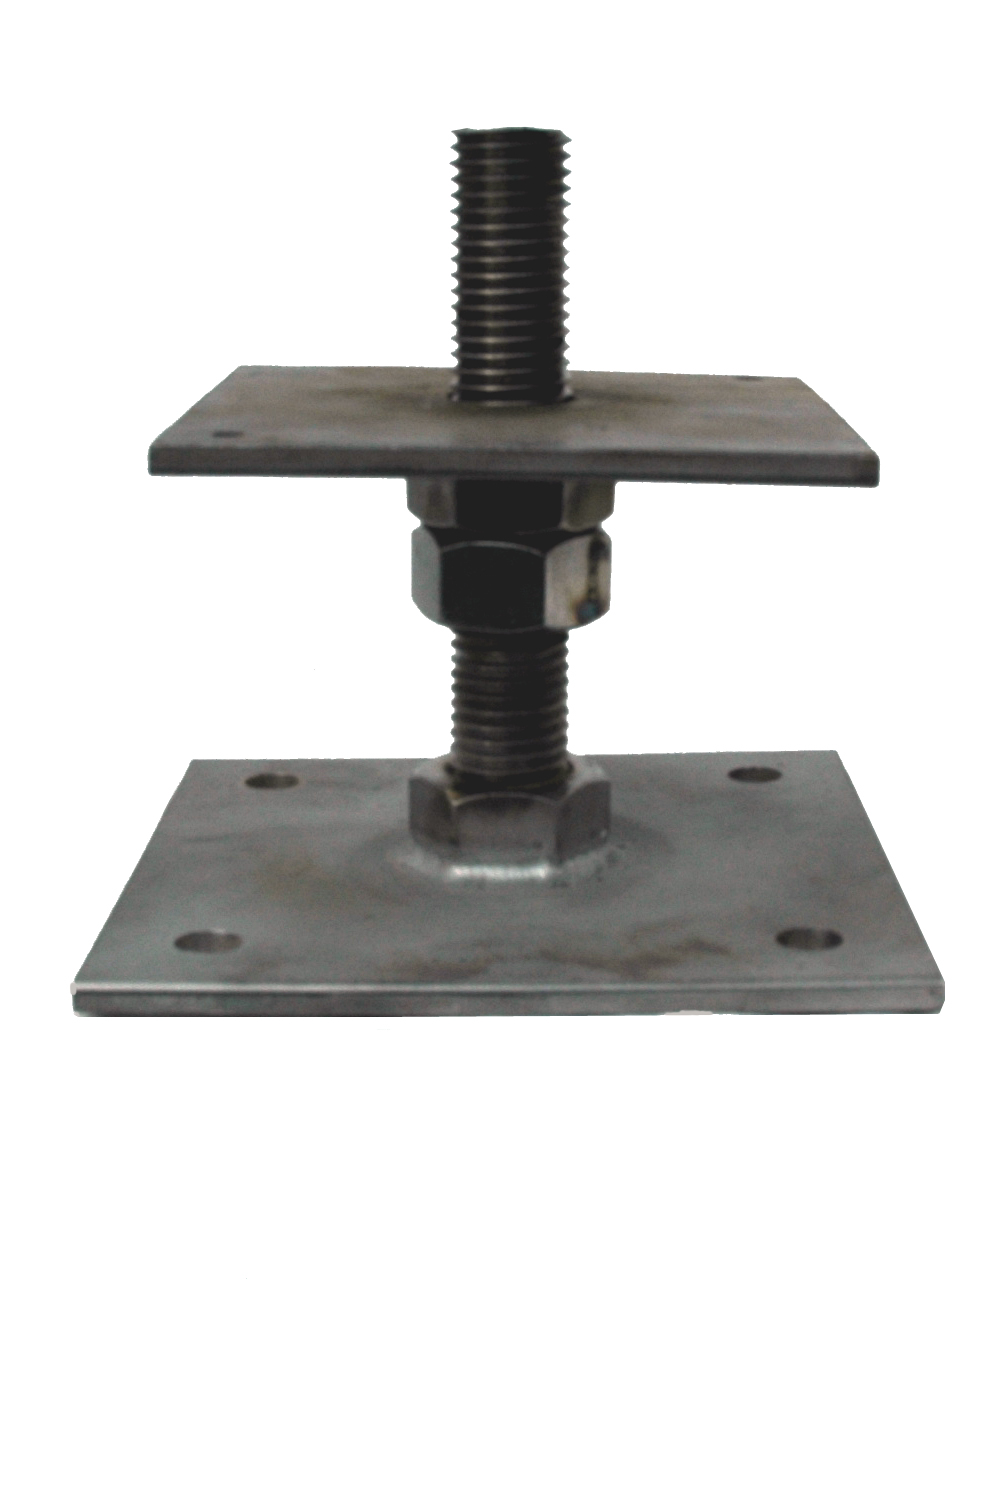 Stainless Steel Adjustable post base, 150mm high, plate size 123mm x 123mm SSB1P3